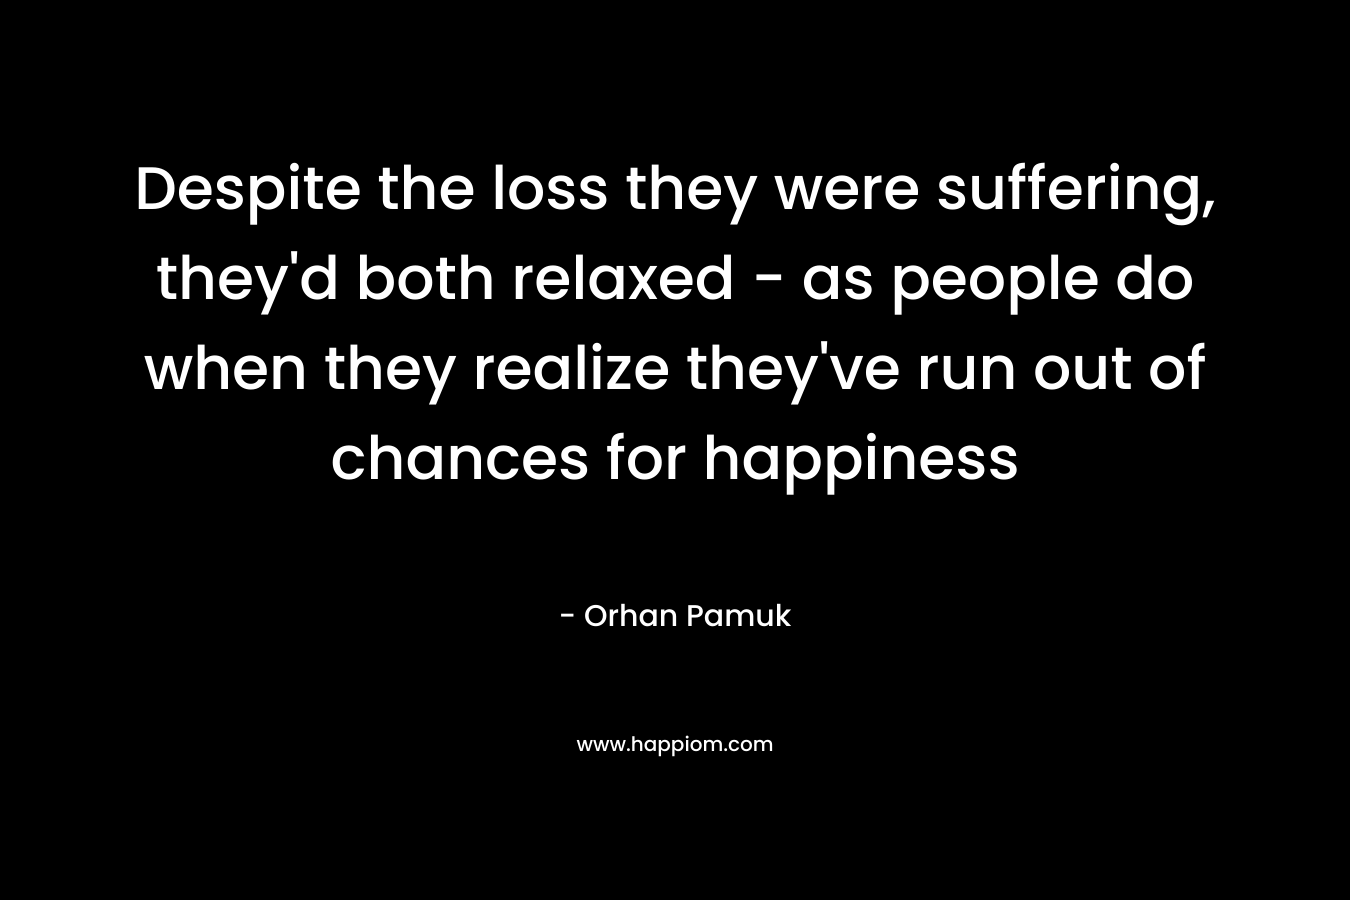 Despite the loss they were suffering, they’d both relaxed – as people do when they realize they’ve run out of chances for happiness – Orhan Pamuk